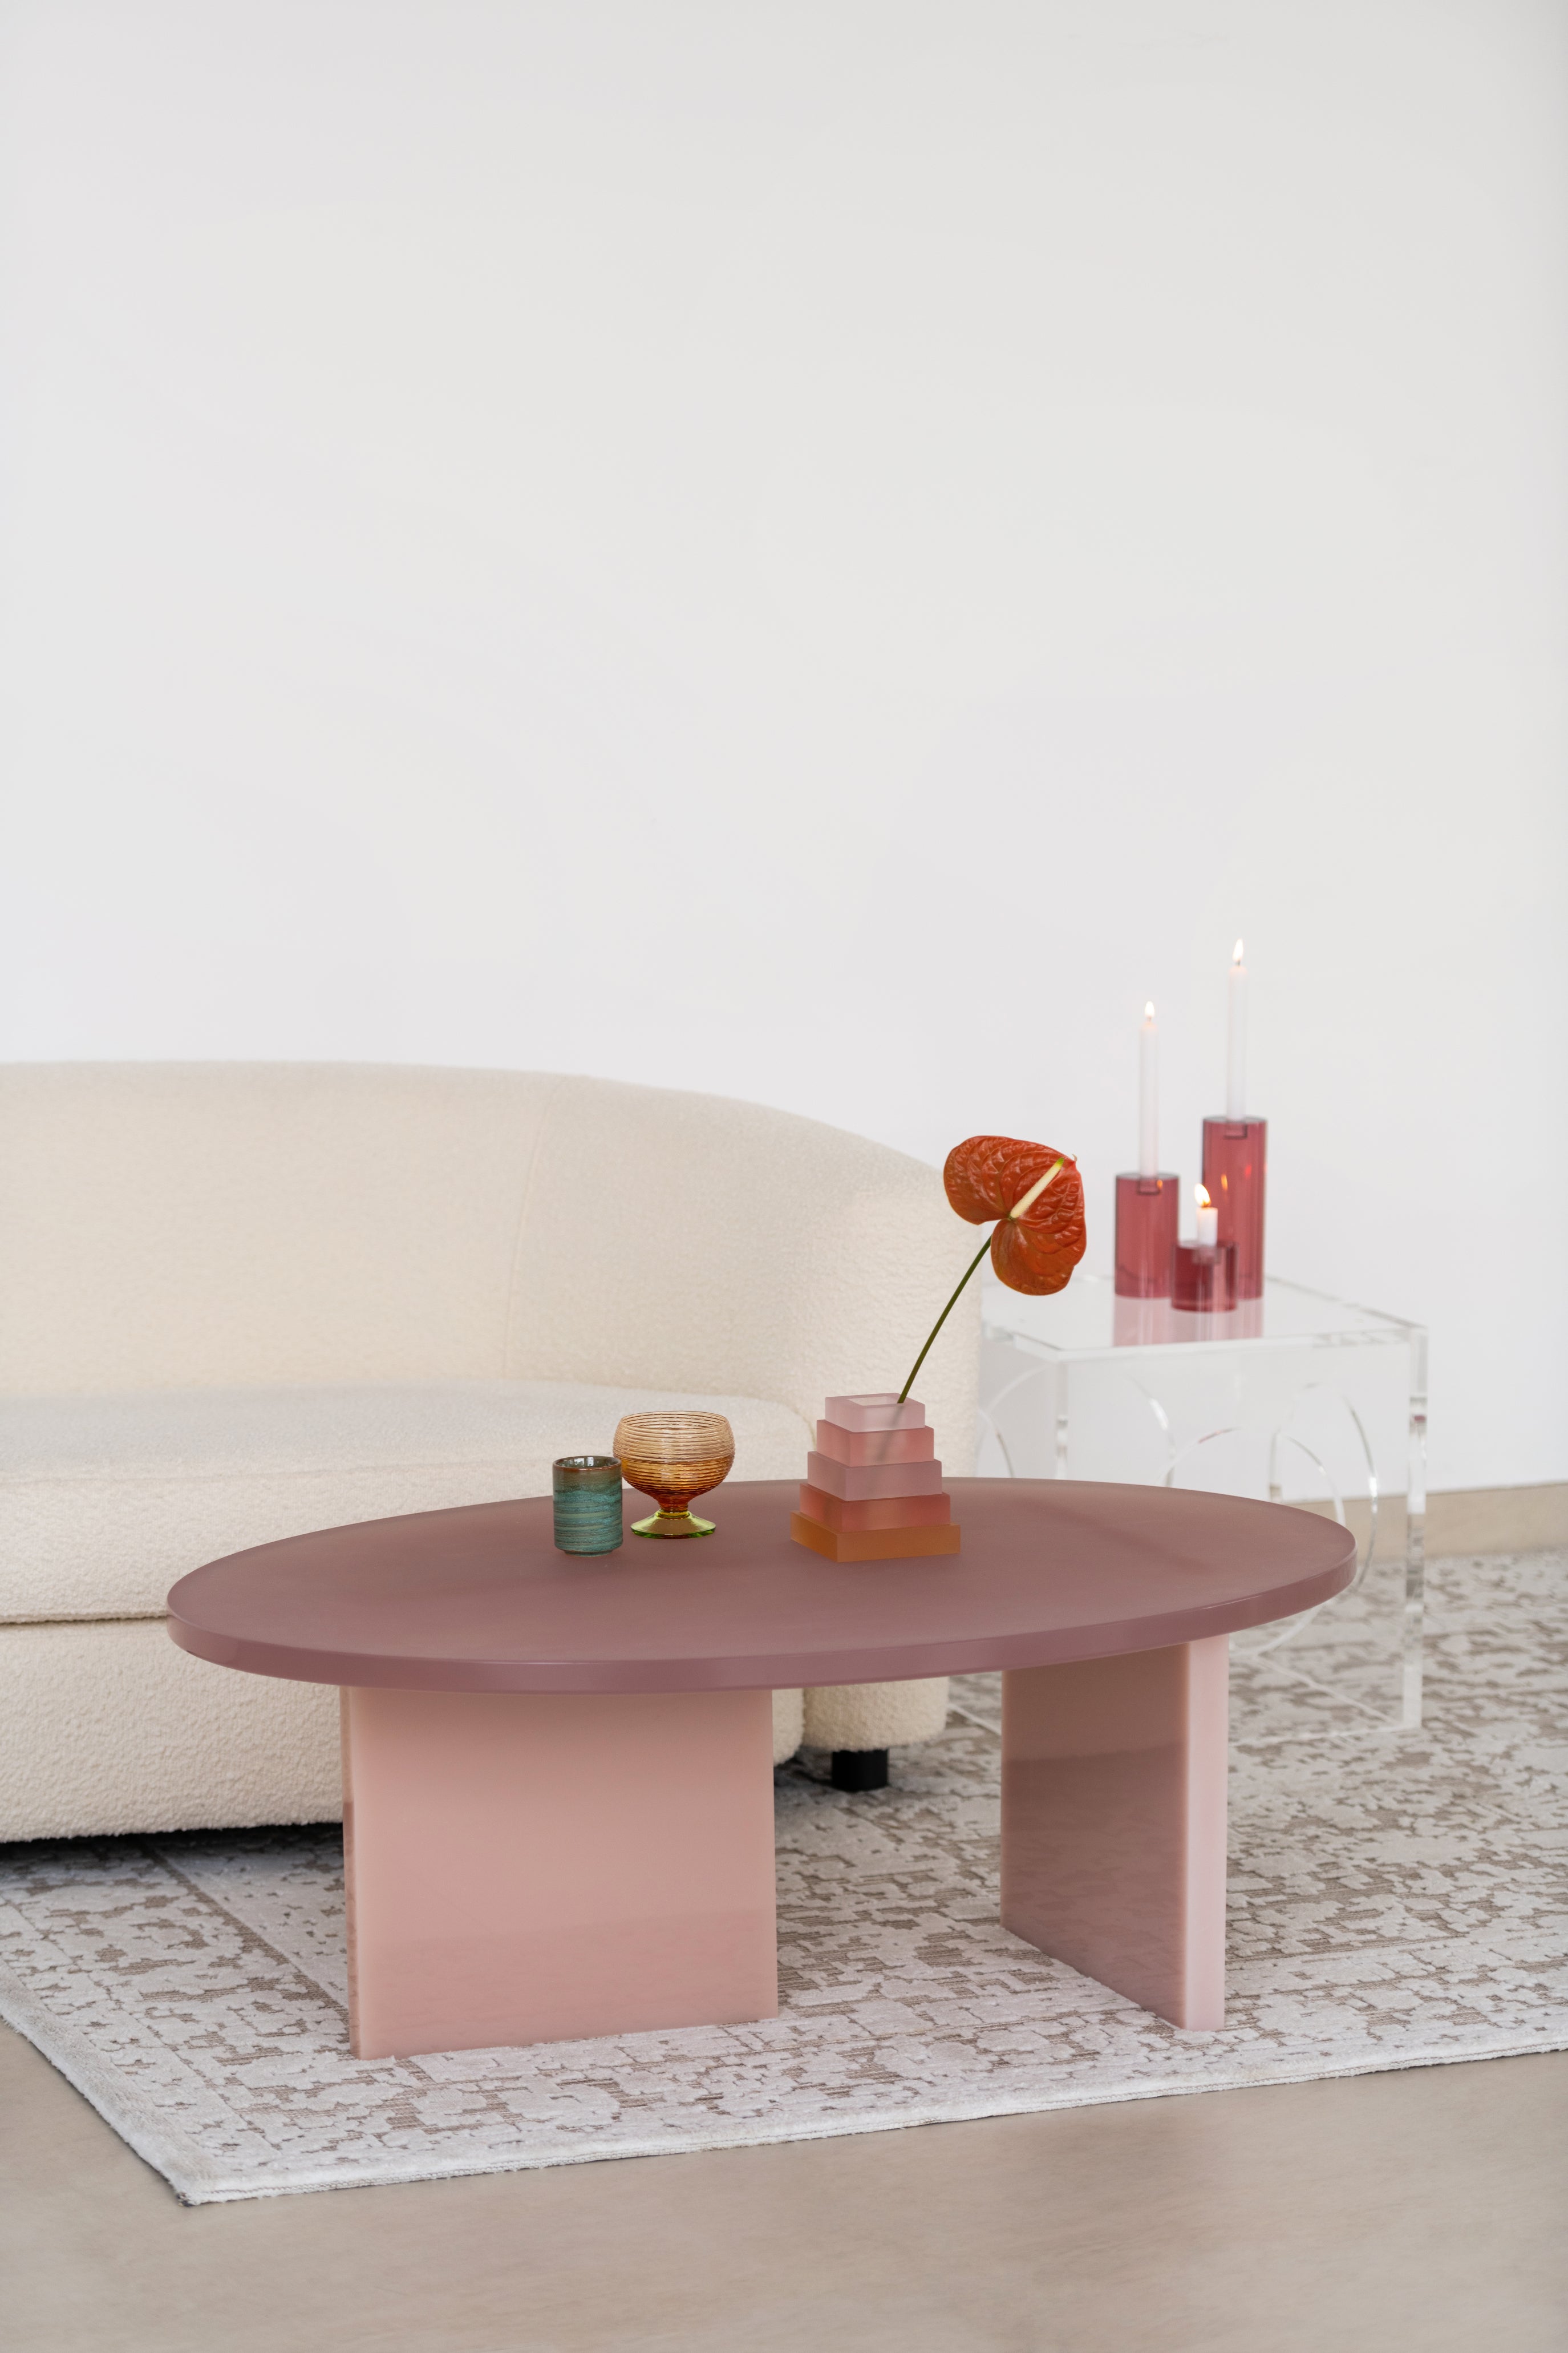 The OVAL resin pink coffee table